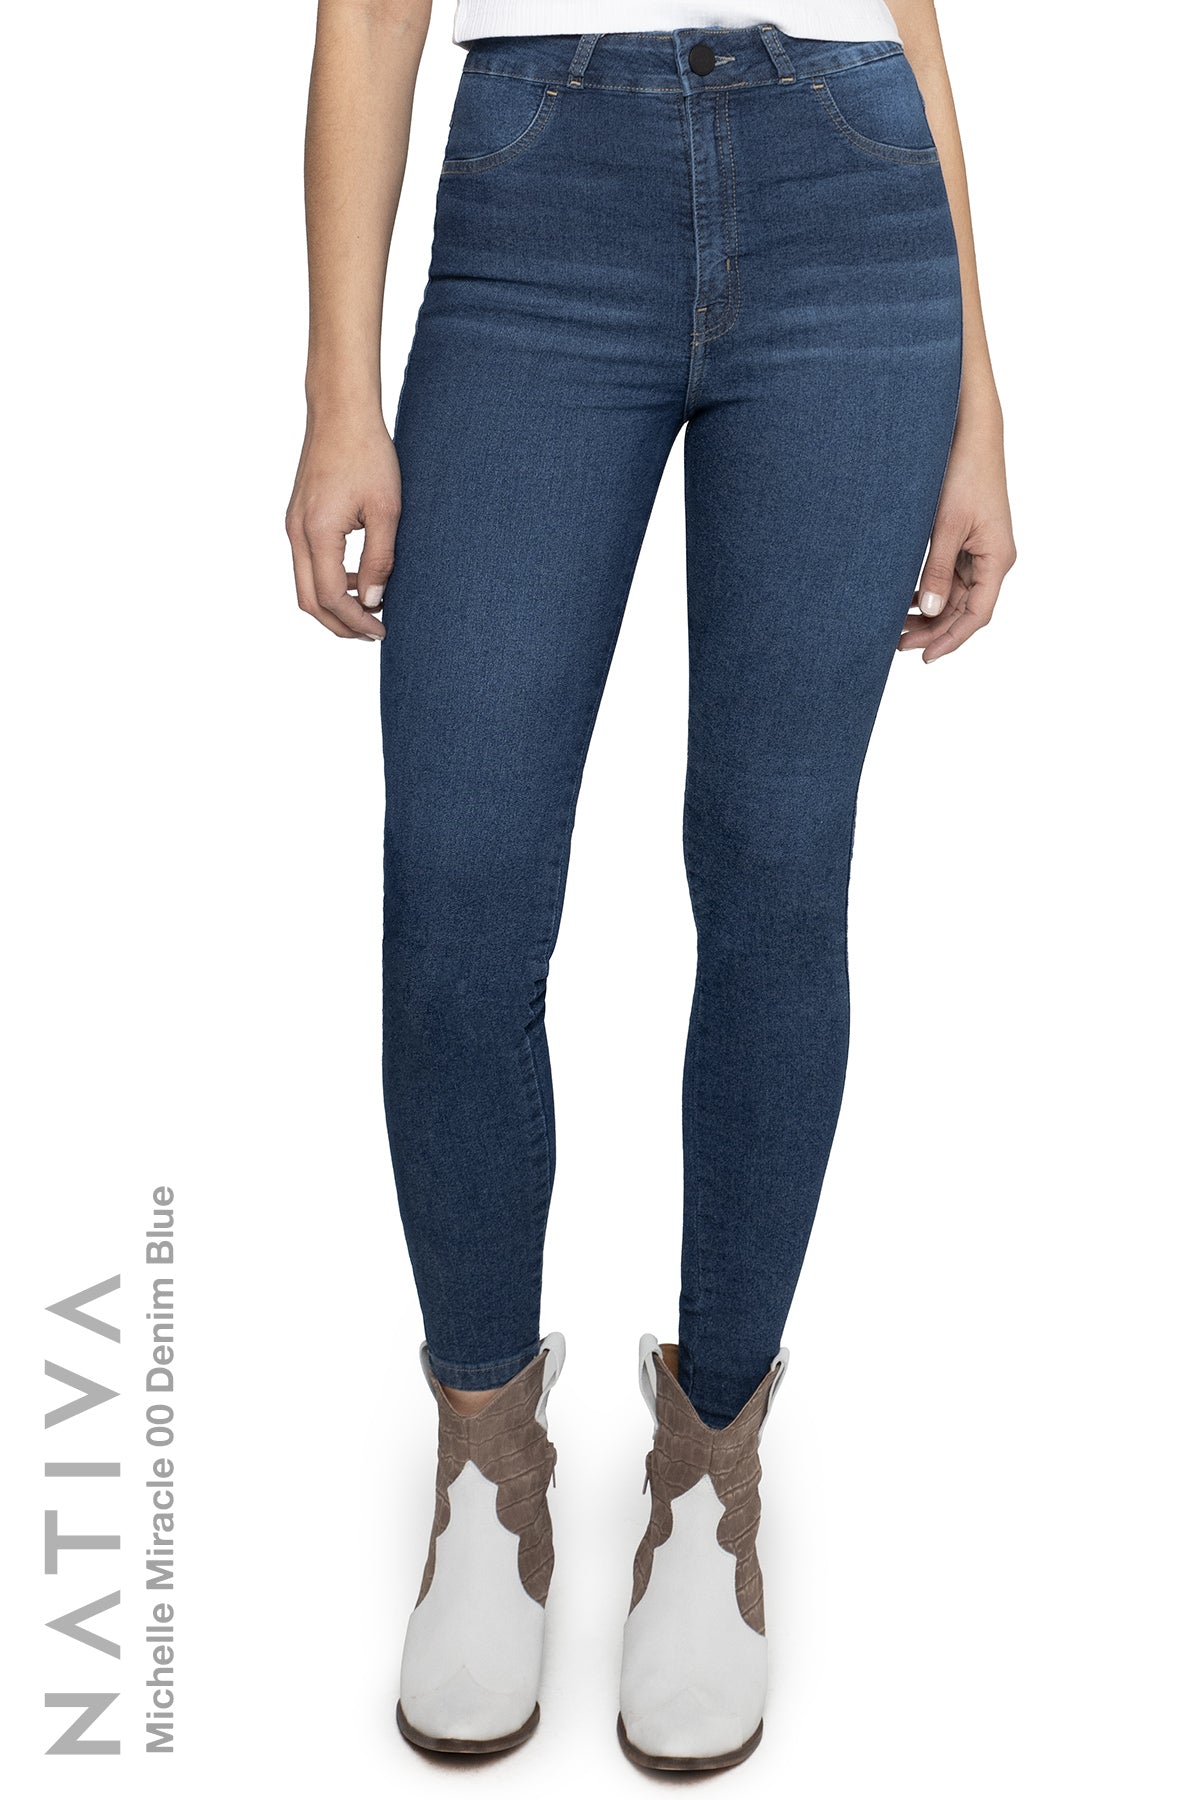 NATIVA, STRETCH MIRACLE JEANS. BLUE, MICHELLE DENIM Shaping Ca 00 High